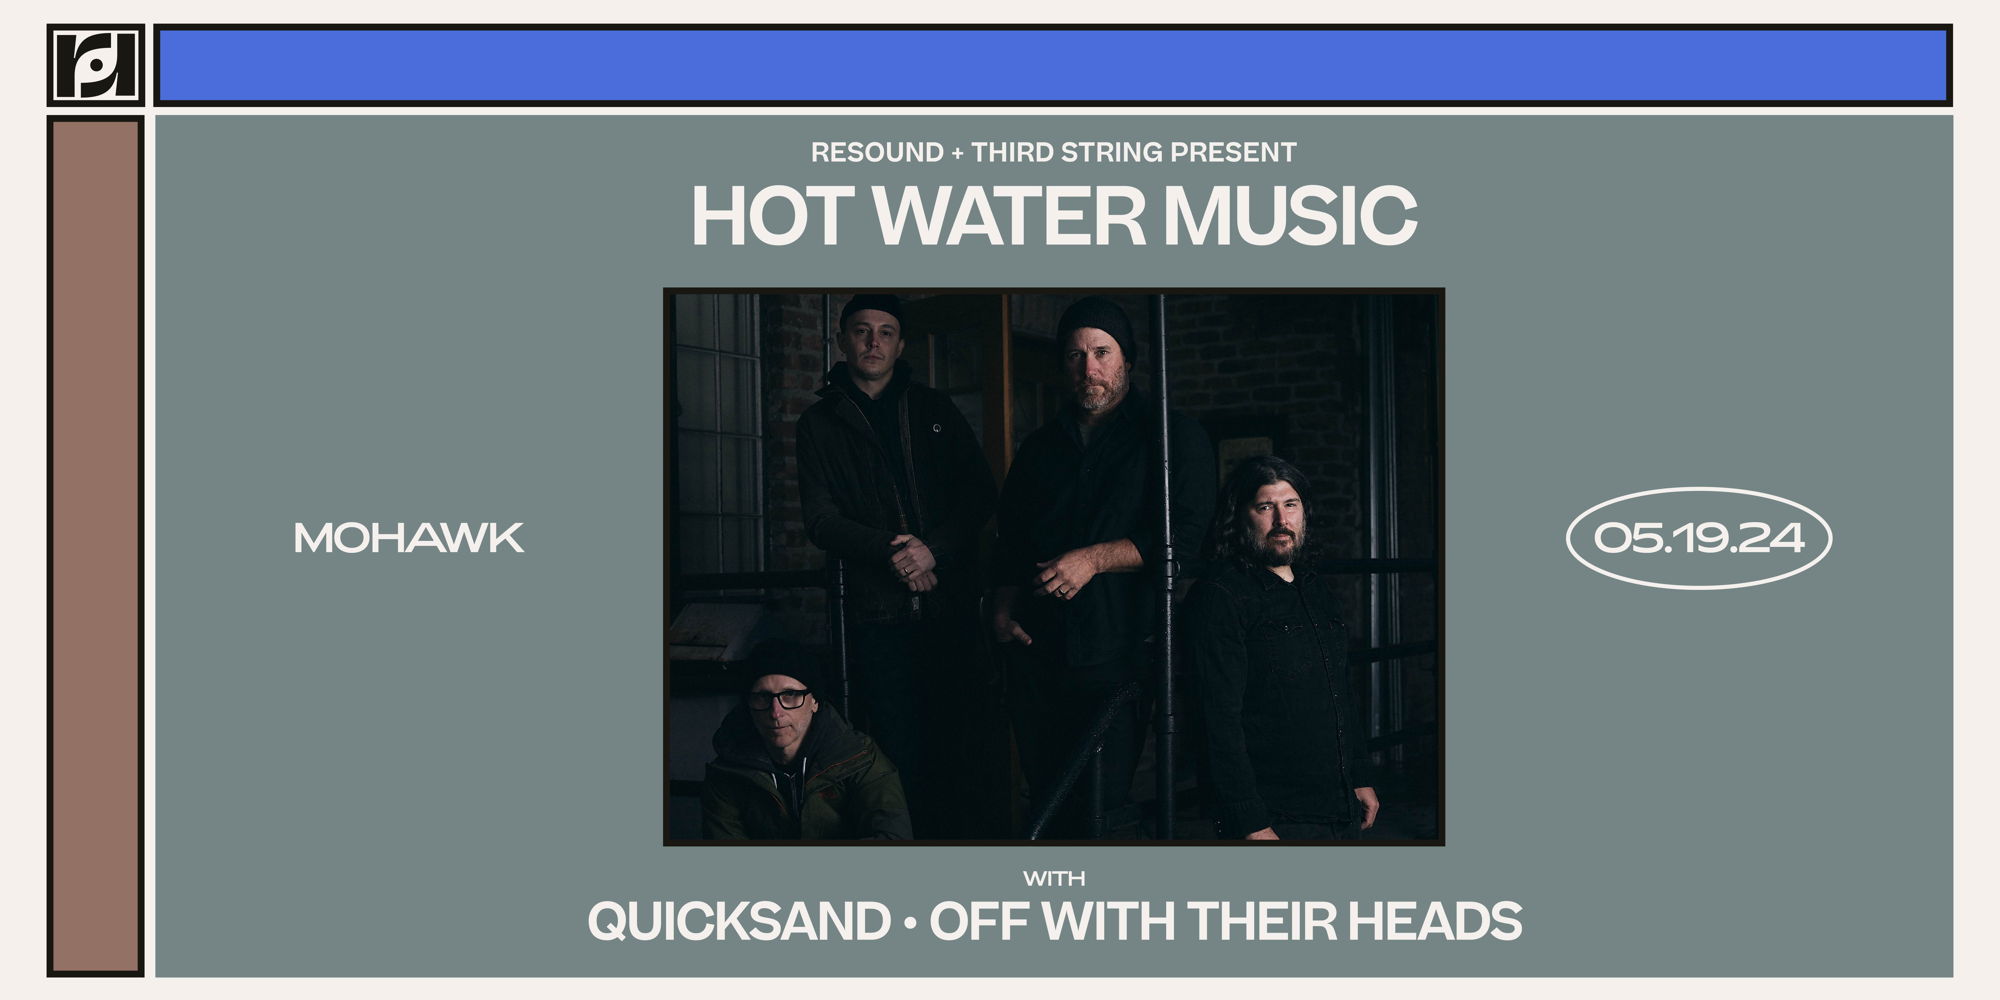 Third String &  Resound Present: Hot Water Music w/ Quicksand & Off with their Heads at Mohawk promotional image